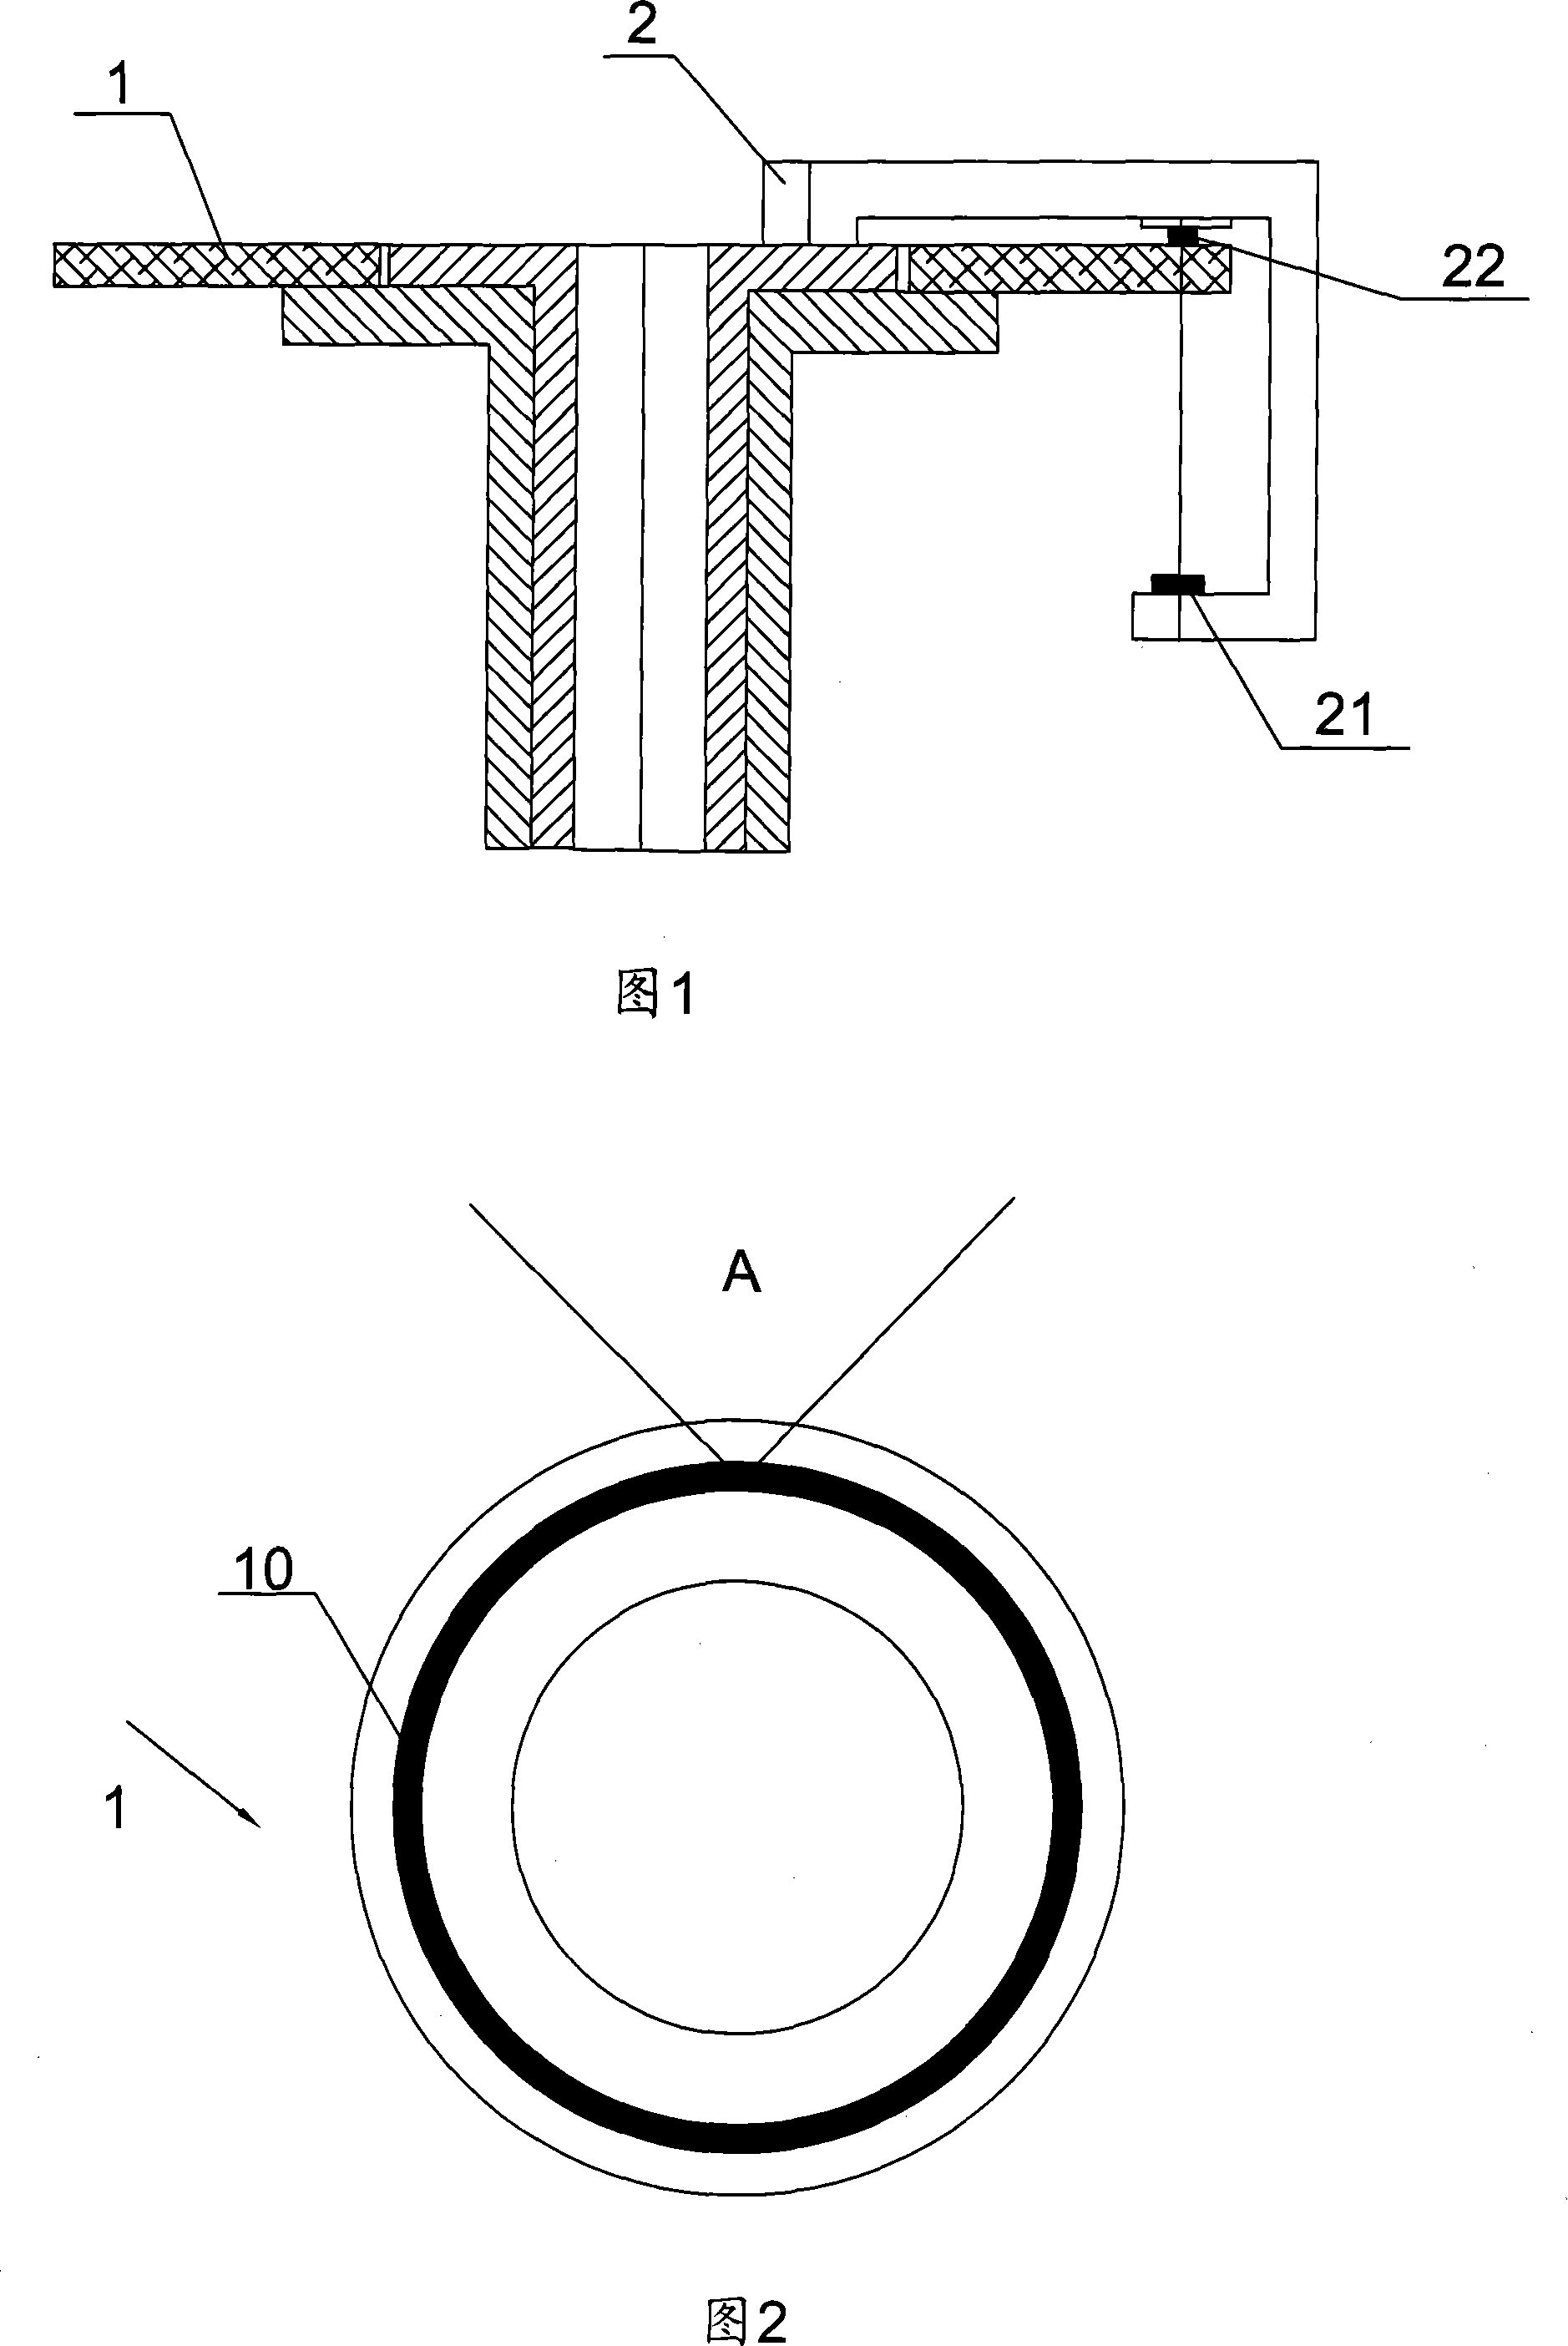 Single-code track absolute angle coded circle and encoder using the same